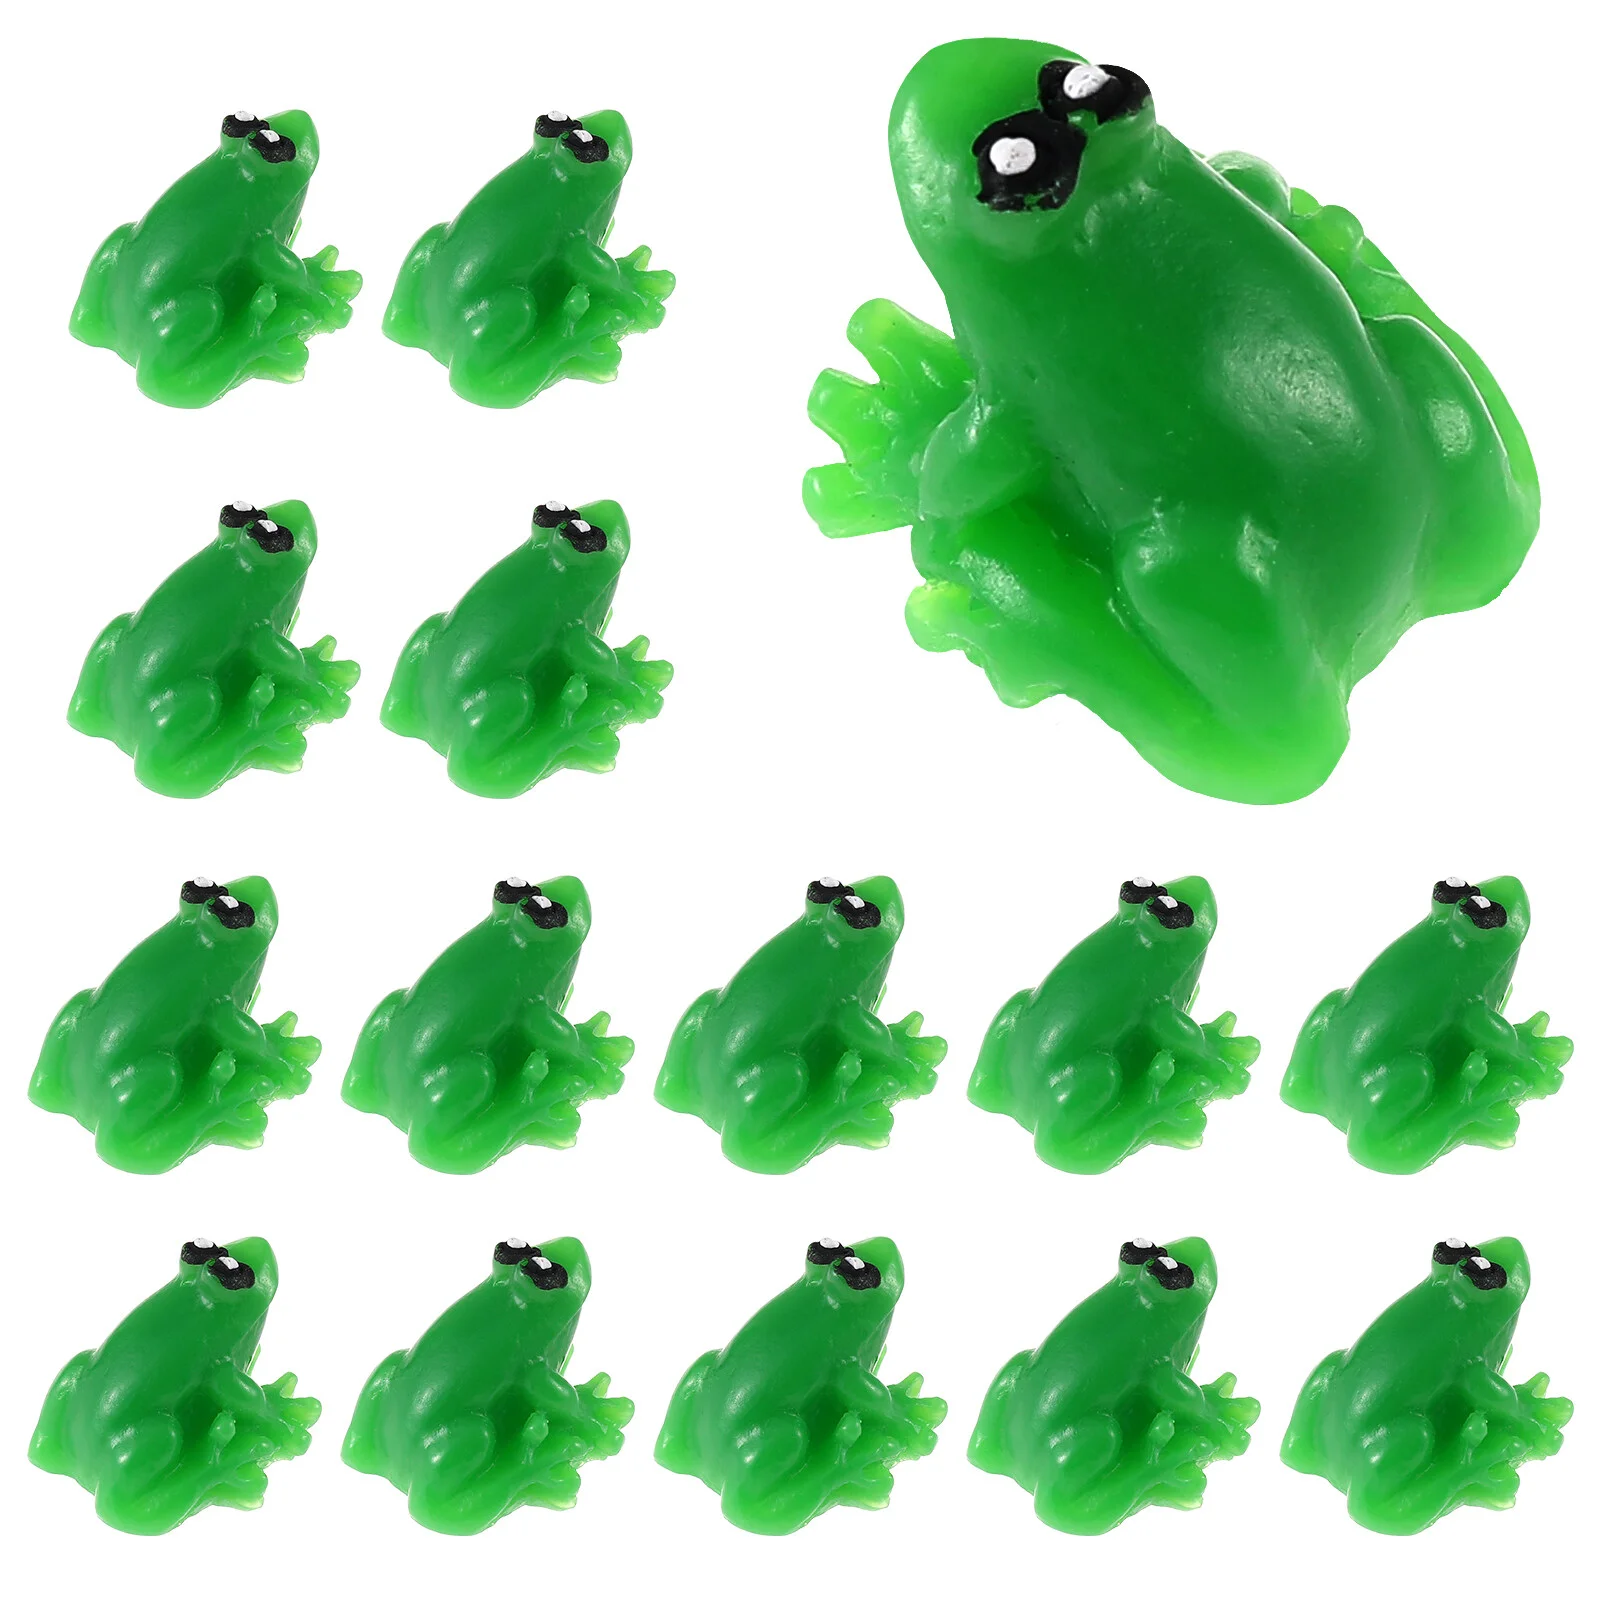 20 Pcs Ornaments Tiny Frogs Playset Accessories Statue Toys Resin Mini Animal Figurines